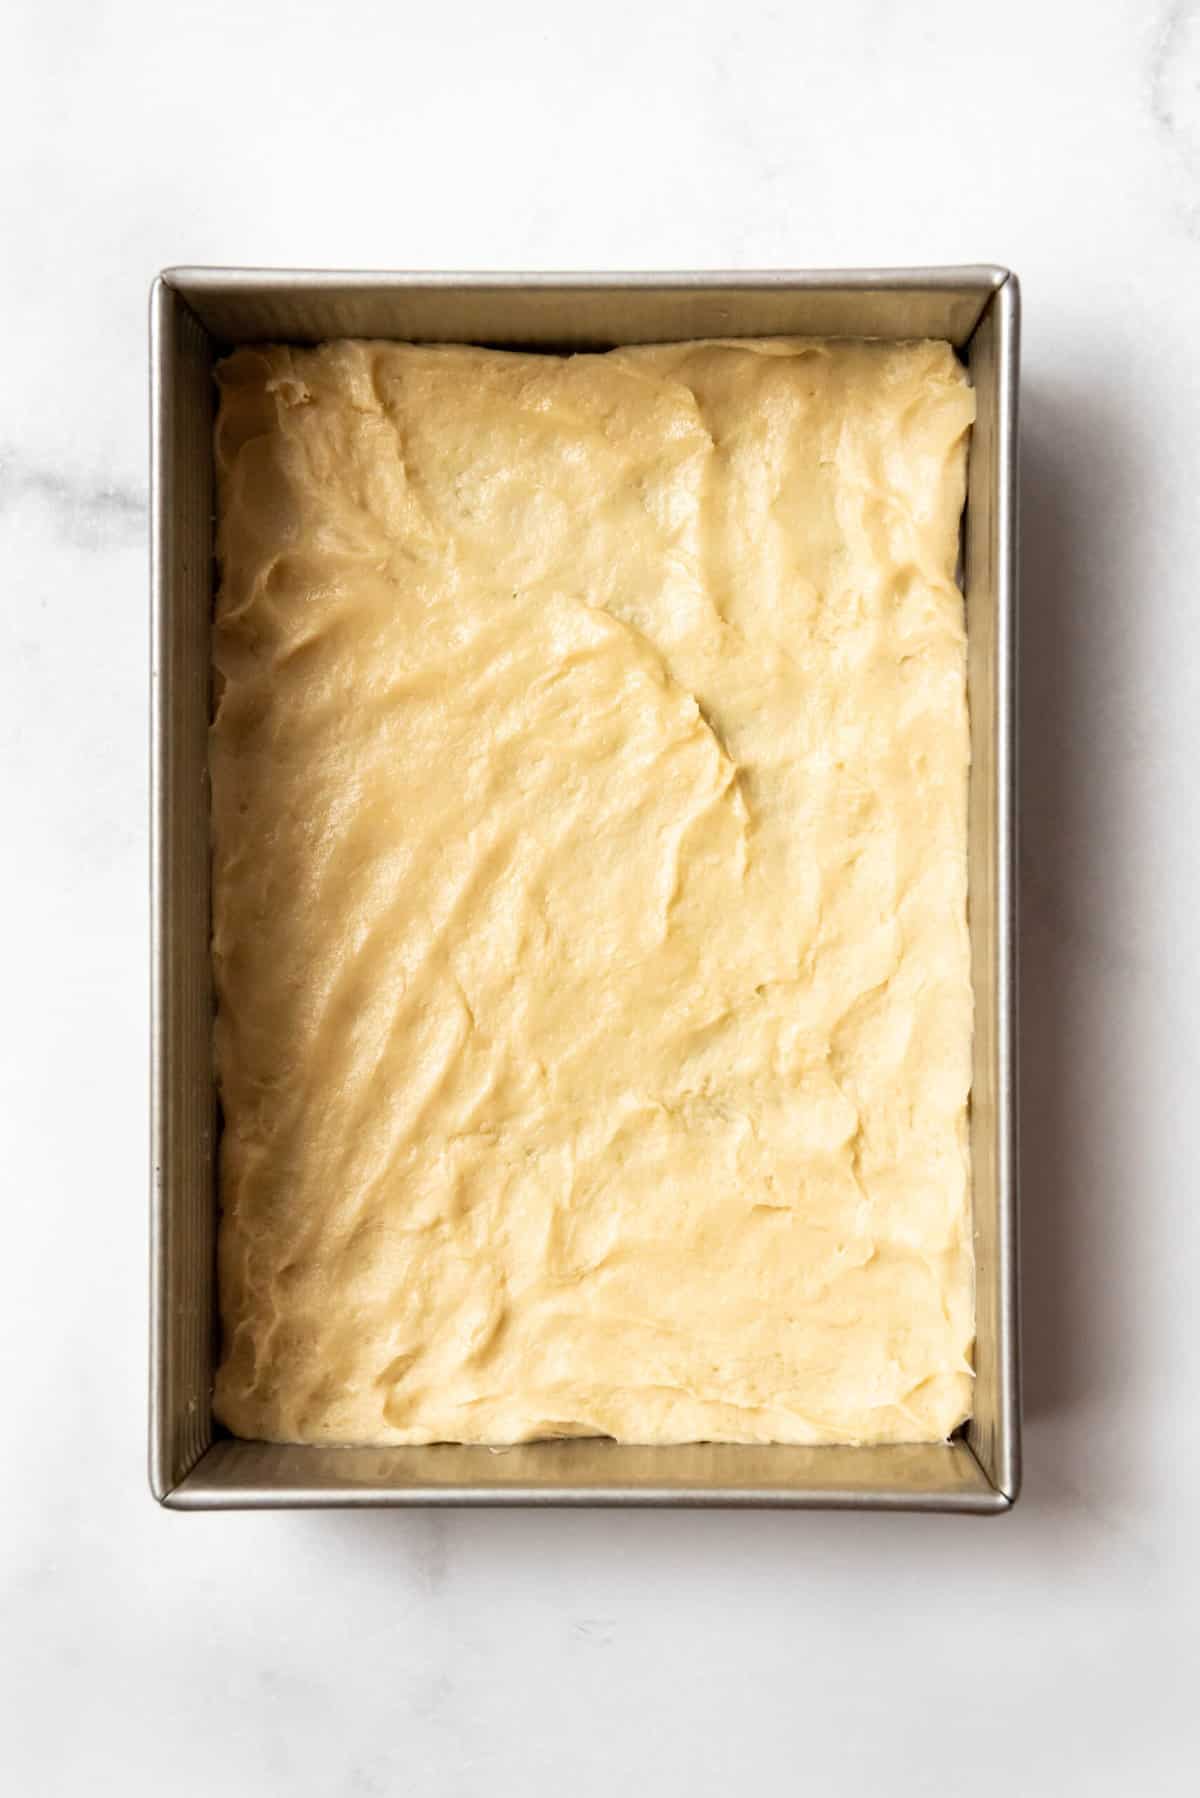 Top view of cake dough pressed into an even layer on the bottom of a pan.